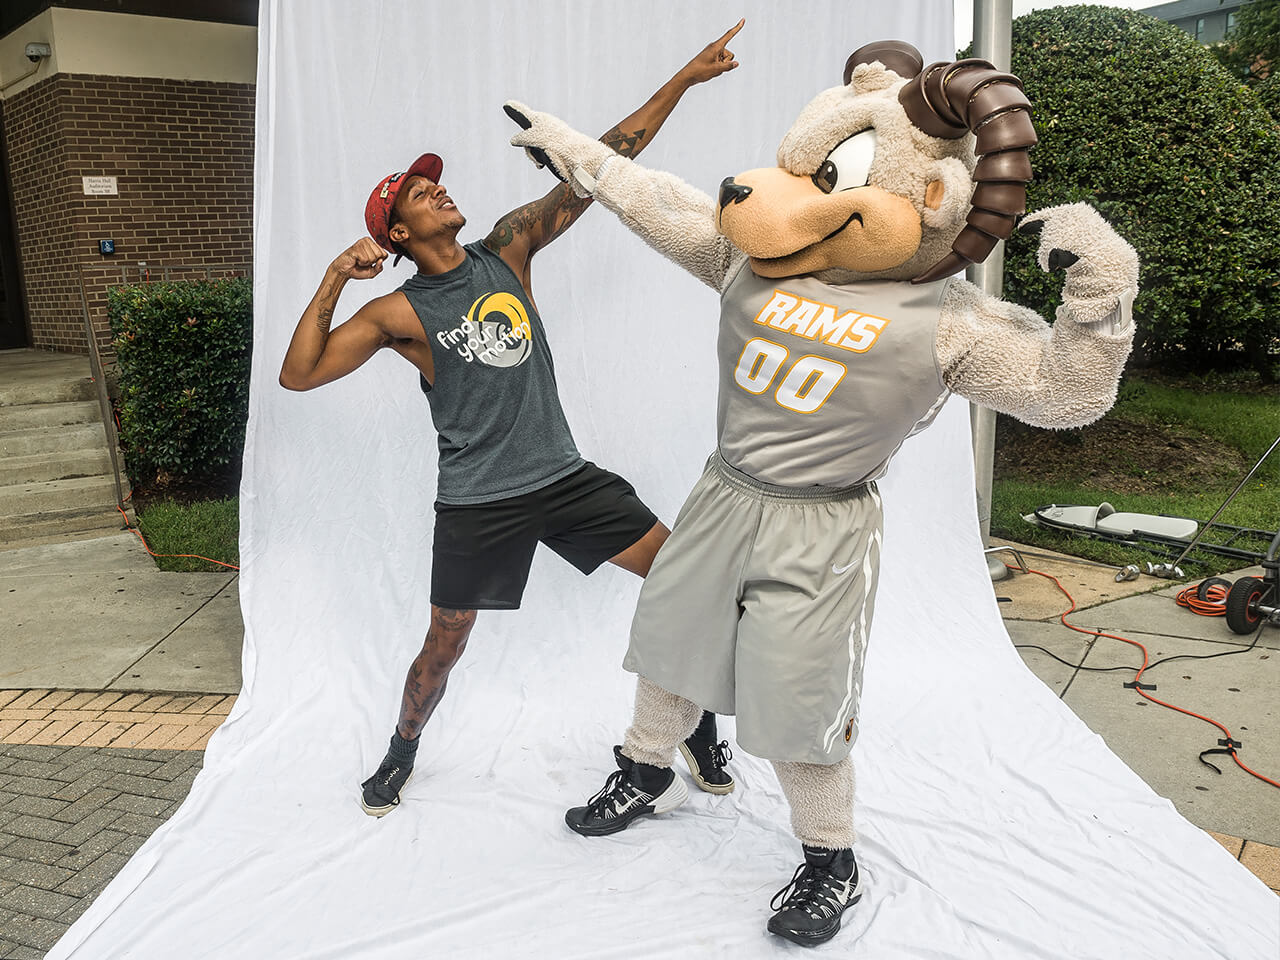 Student in a pointing upward pose with mascot in same pose